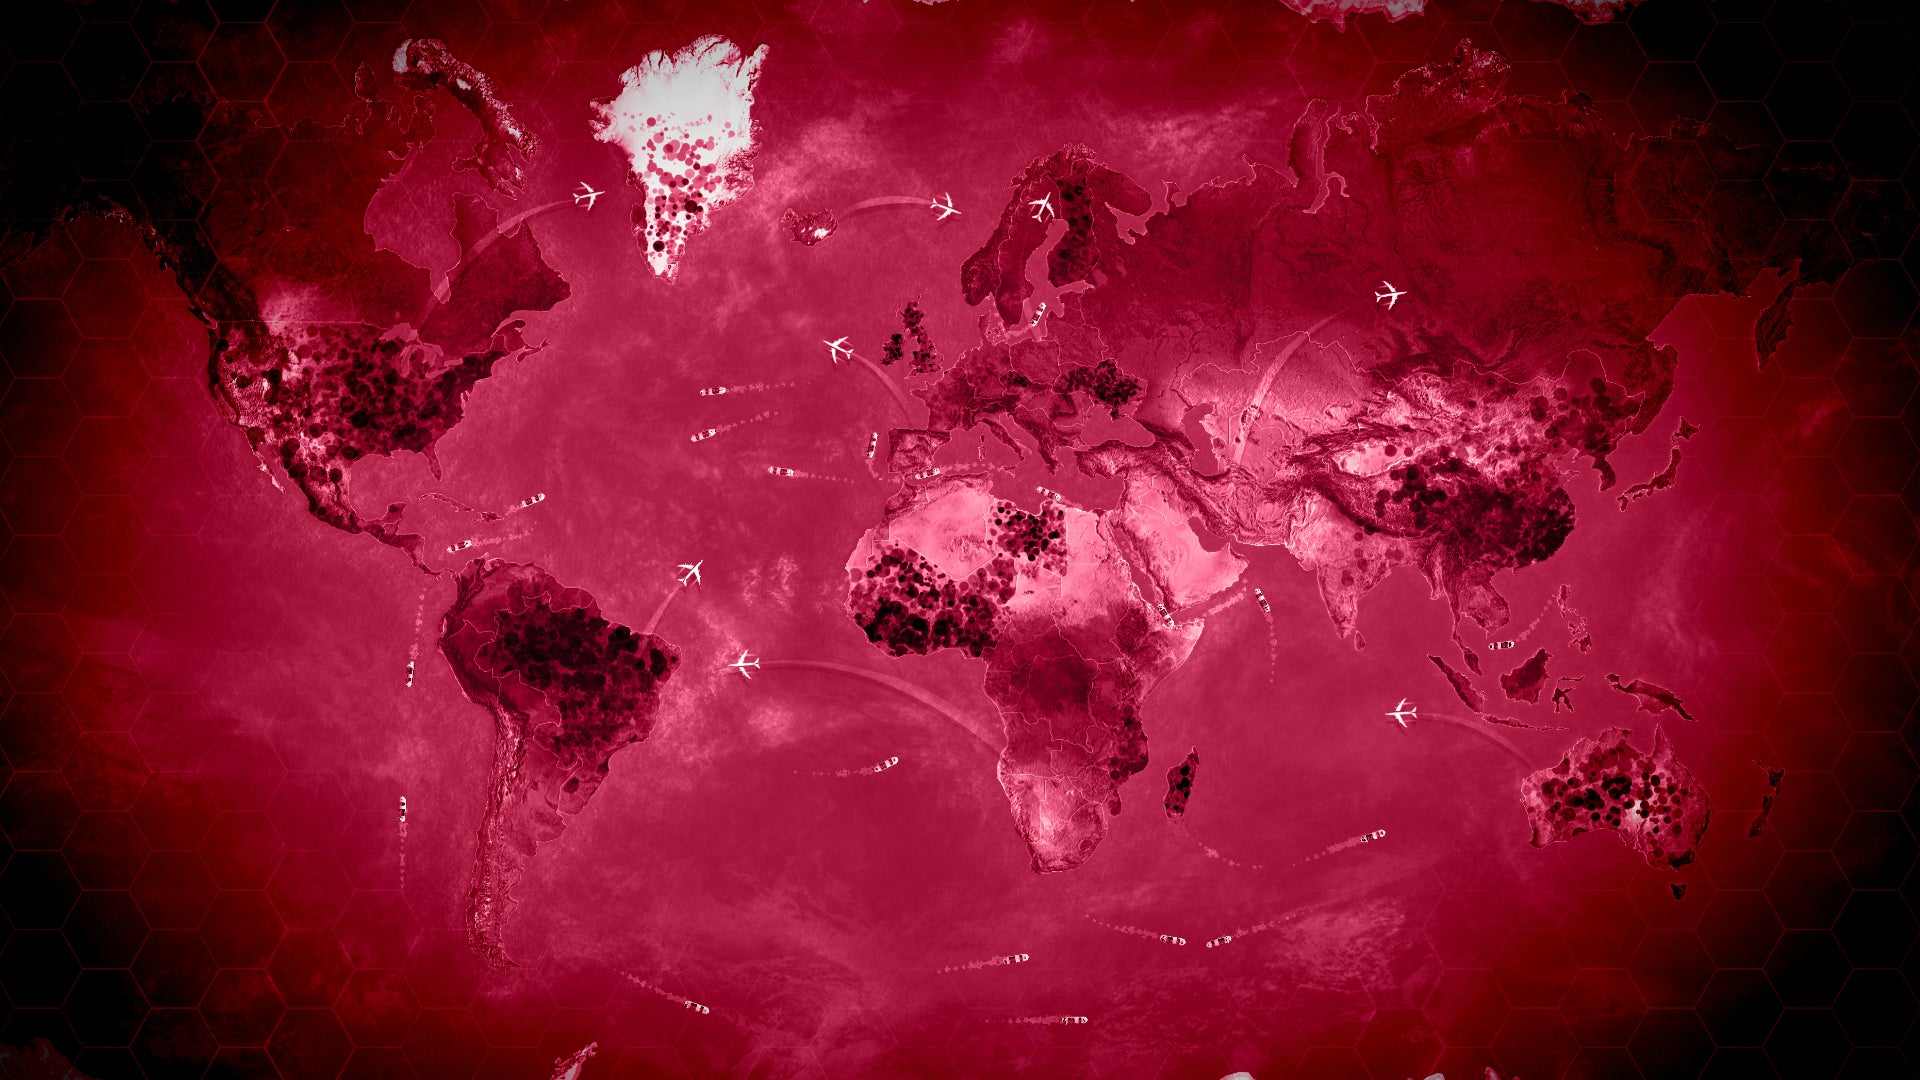 Image for Plague Inc. is getting a free new mode aimed at fighting, not creating, global pandemics